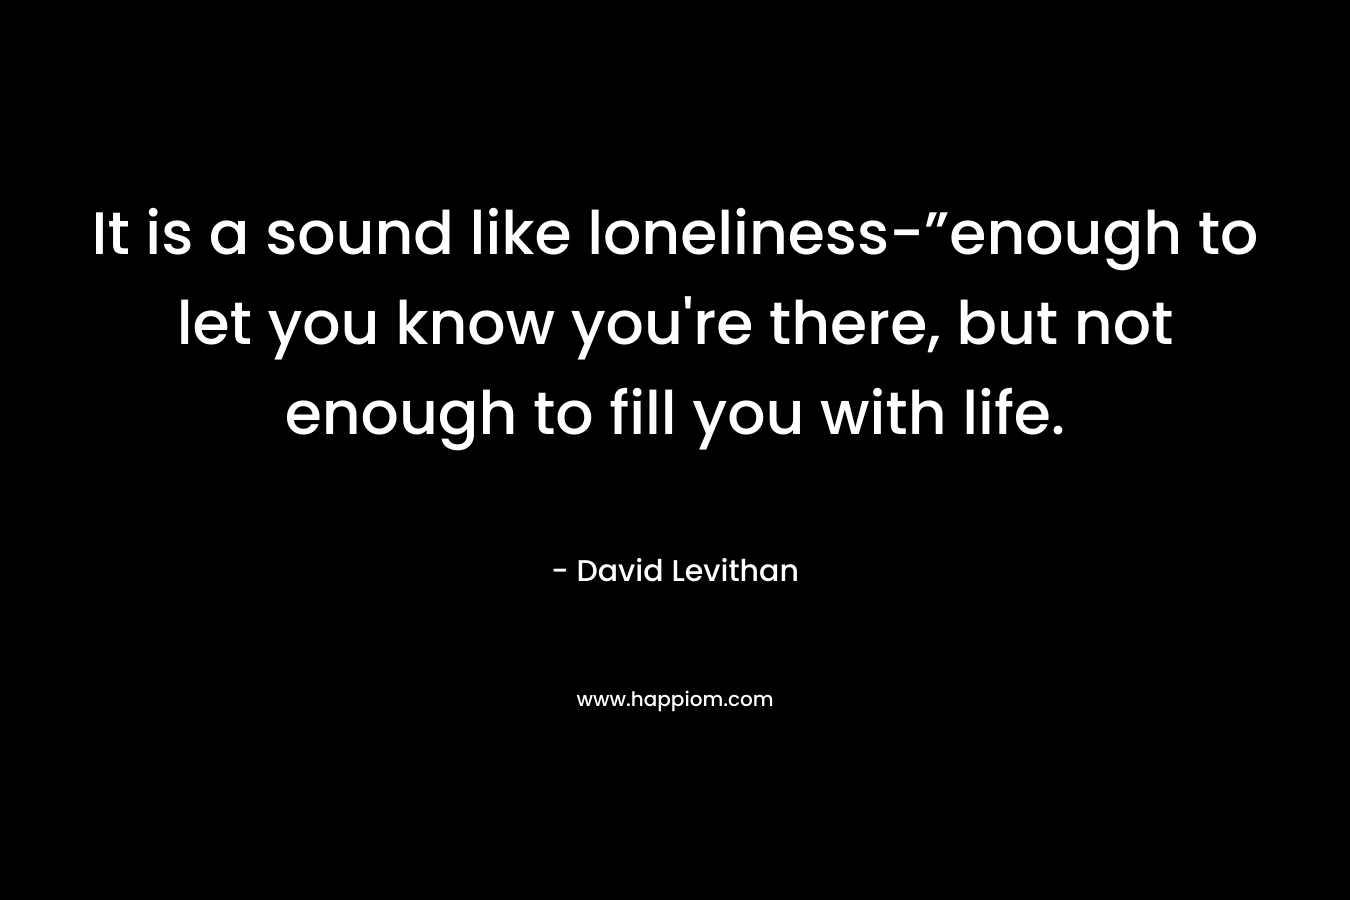 It is a sound like loneliness-”enough to let you know you're there, but not enough to fill you with life.